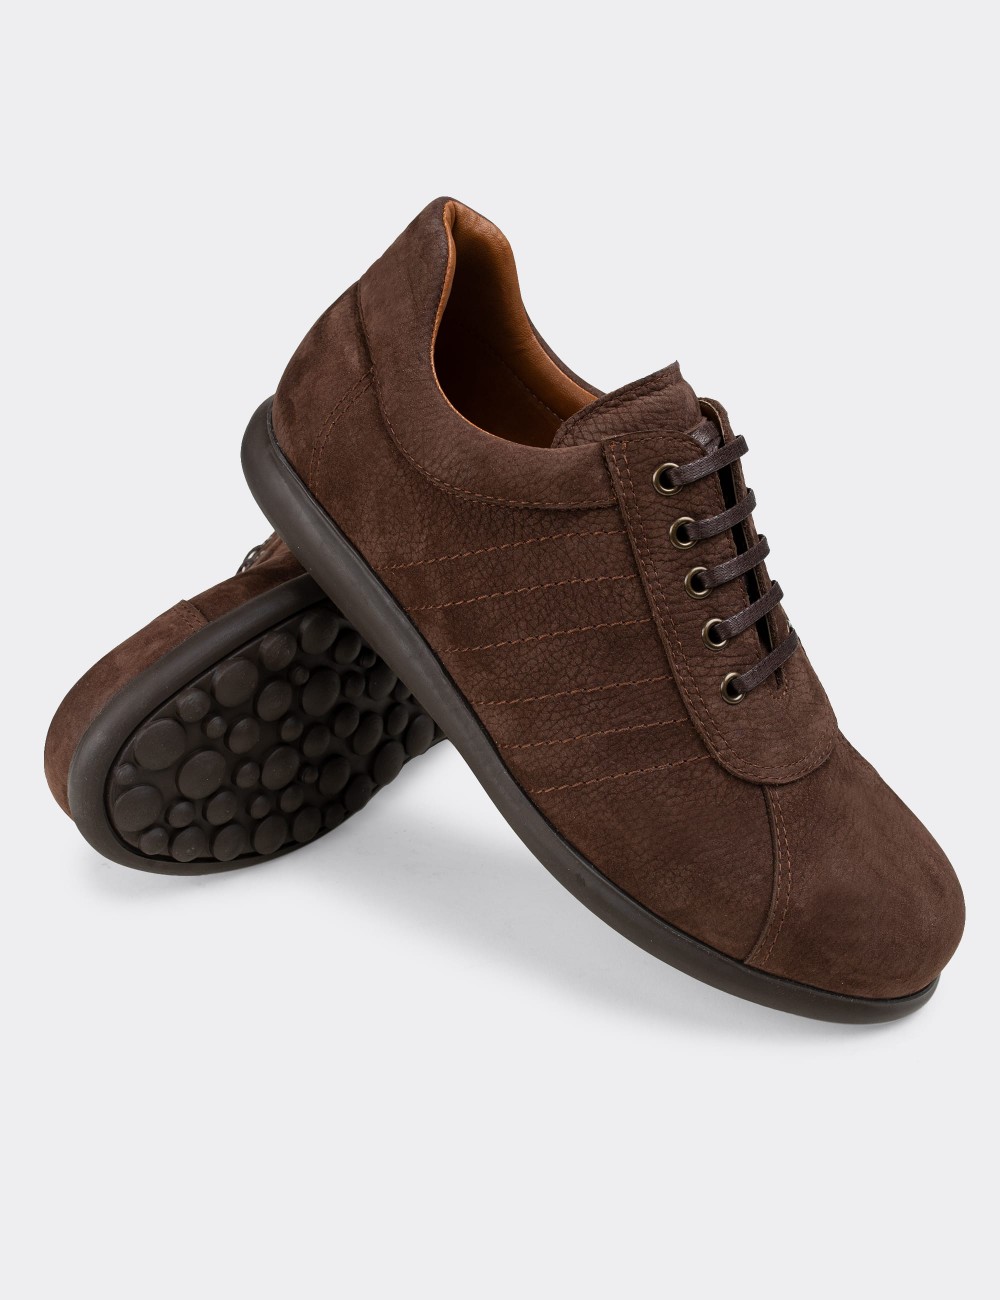 Brown Nubuck Leather Lace-up Shoes - 01828MKHVC01